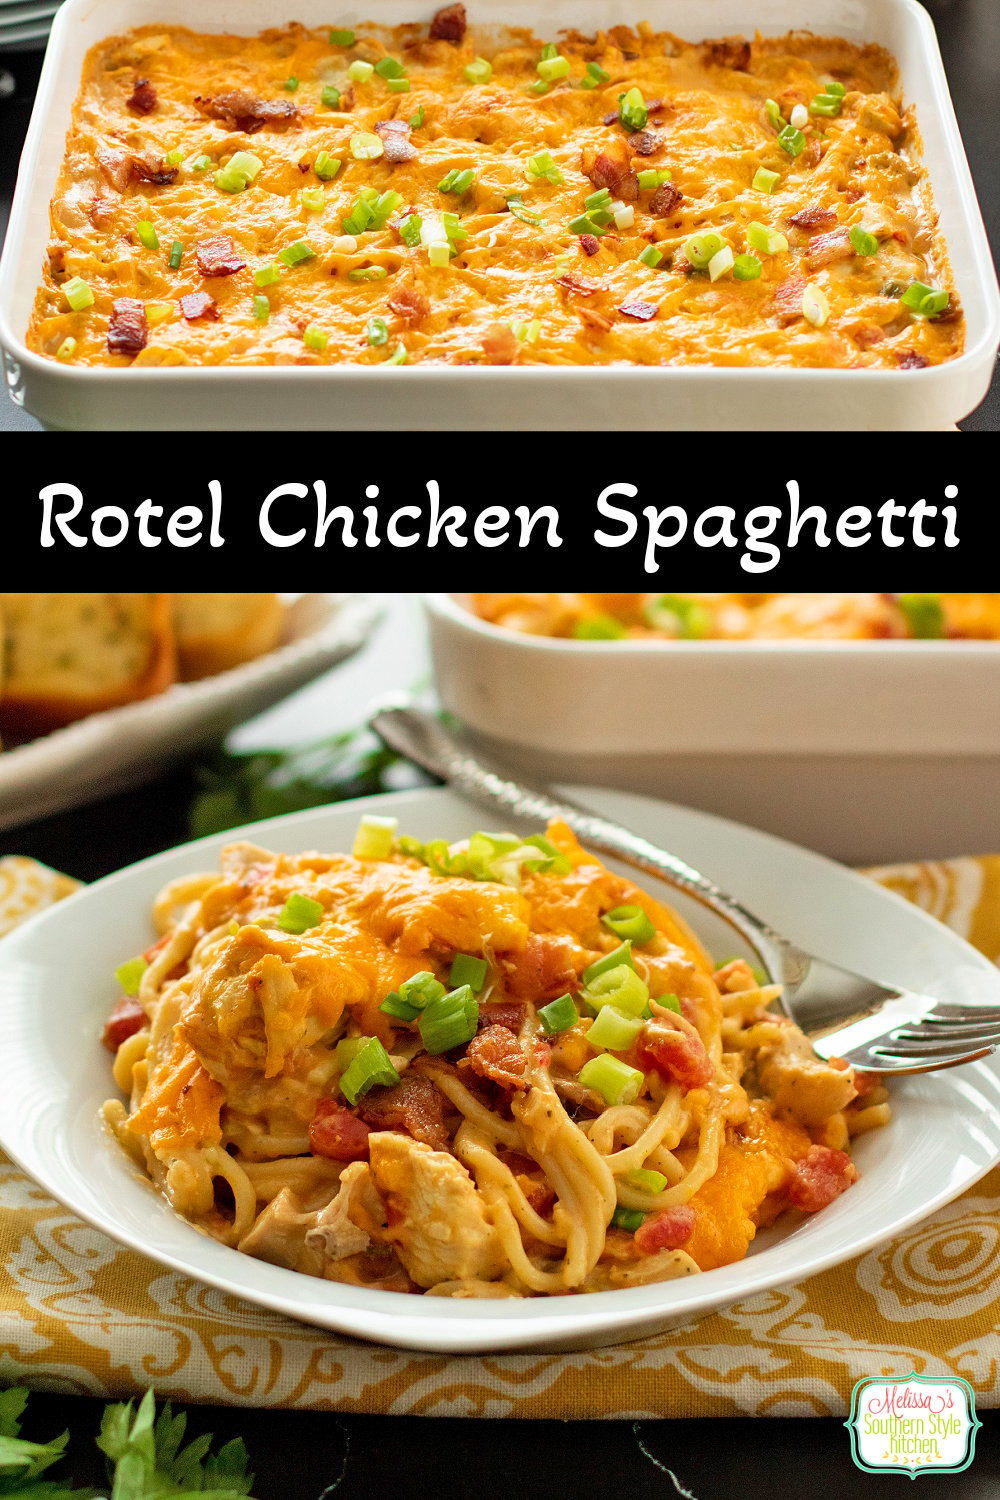 This delicious Rotel Chicken Spaghetti recipe features a homemade cheese sauce seasoned with Rotel tomatoes, rotisserie chicken and bacon. #chickenspaghetti #spaghetti #homemadespaghetti #easychickenrecipes #easypastarecipes #pasta #roteltomatoes #rotelrecipes #rotisseriechickenrecipes #bestchickenspaghetti via @melissasssk